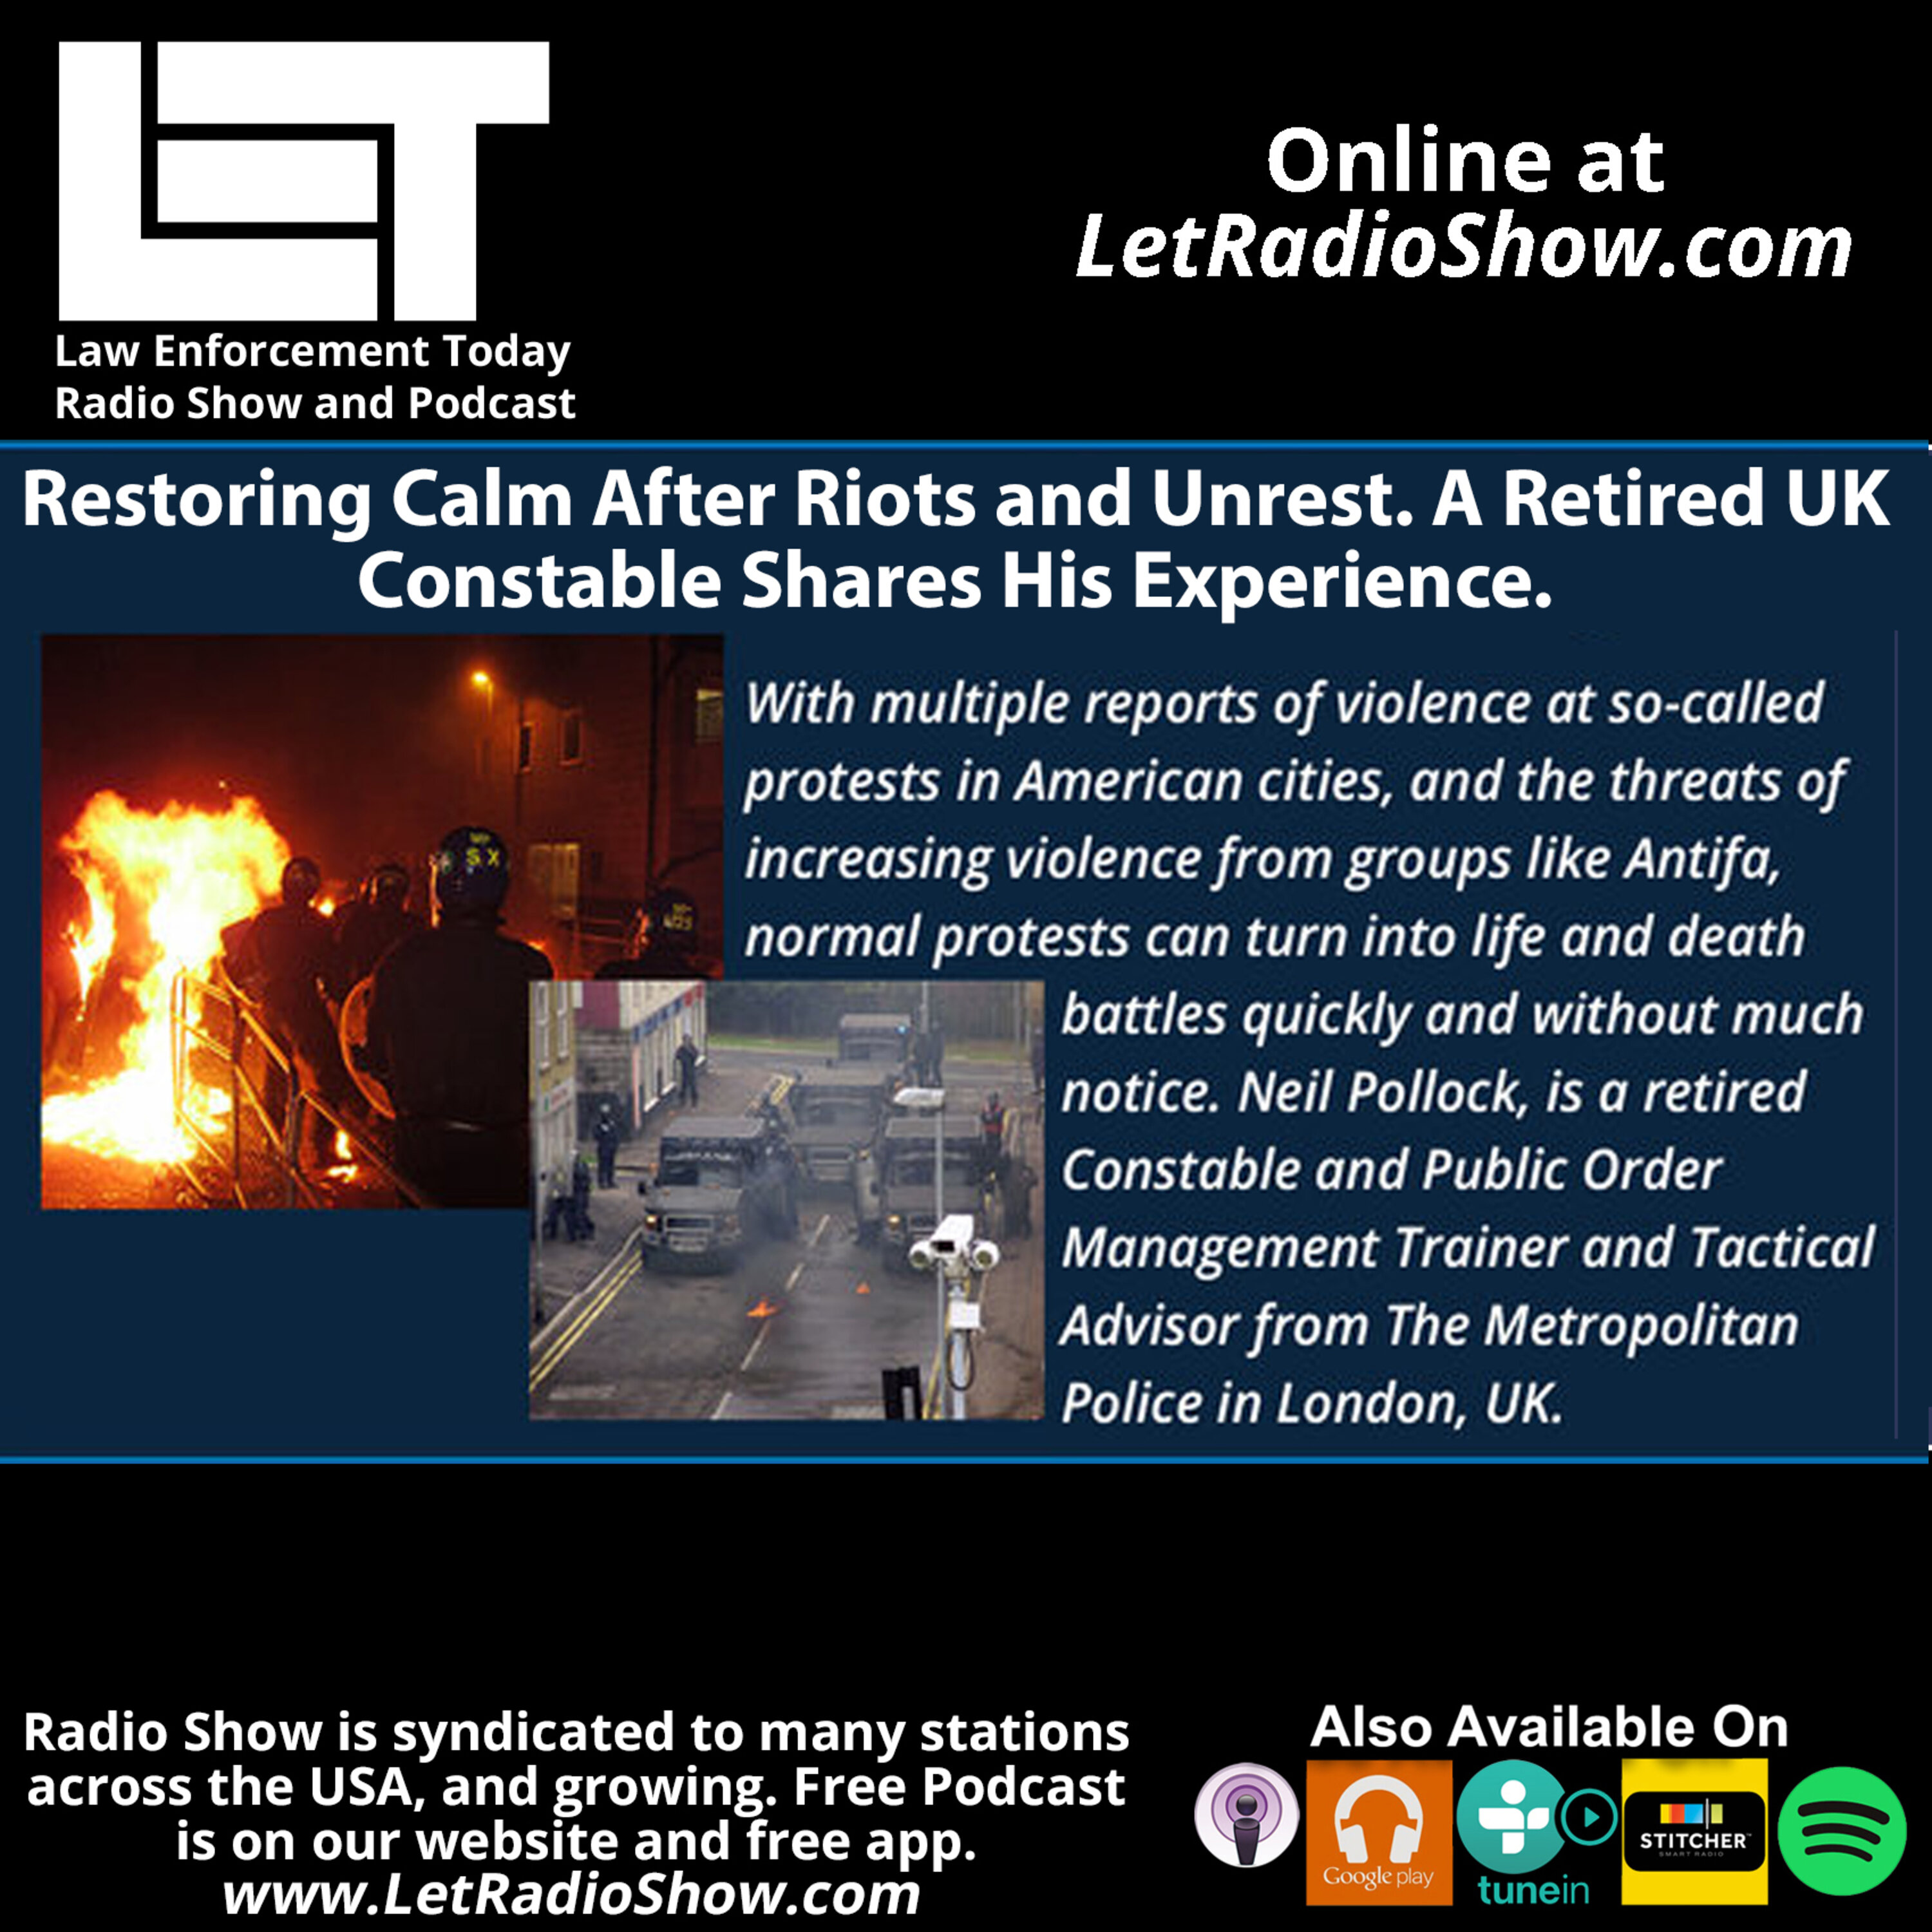 S6E97: Restoring Calm After Riots And Unrest. A Retired UK Constable Shares His Experience. Special Episode Image